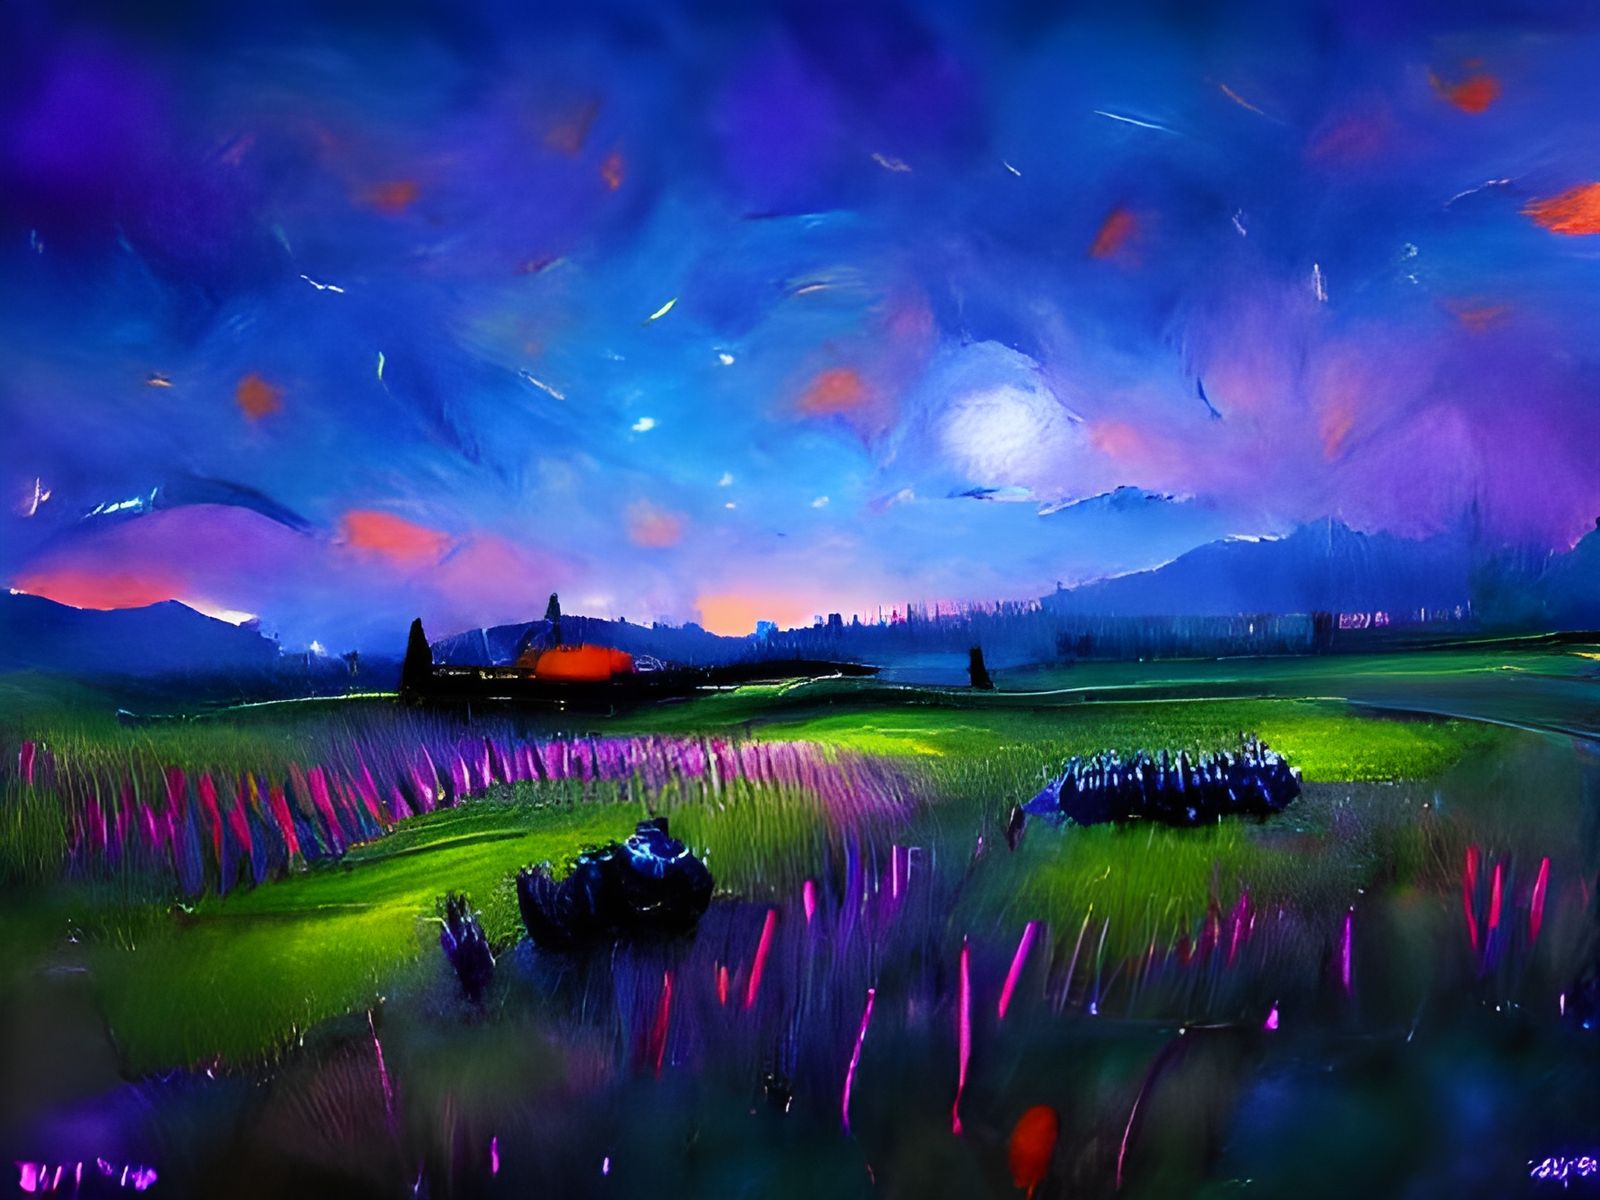 Violet sky at twilight with the legacy "artistic" model